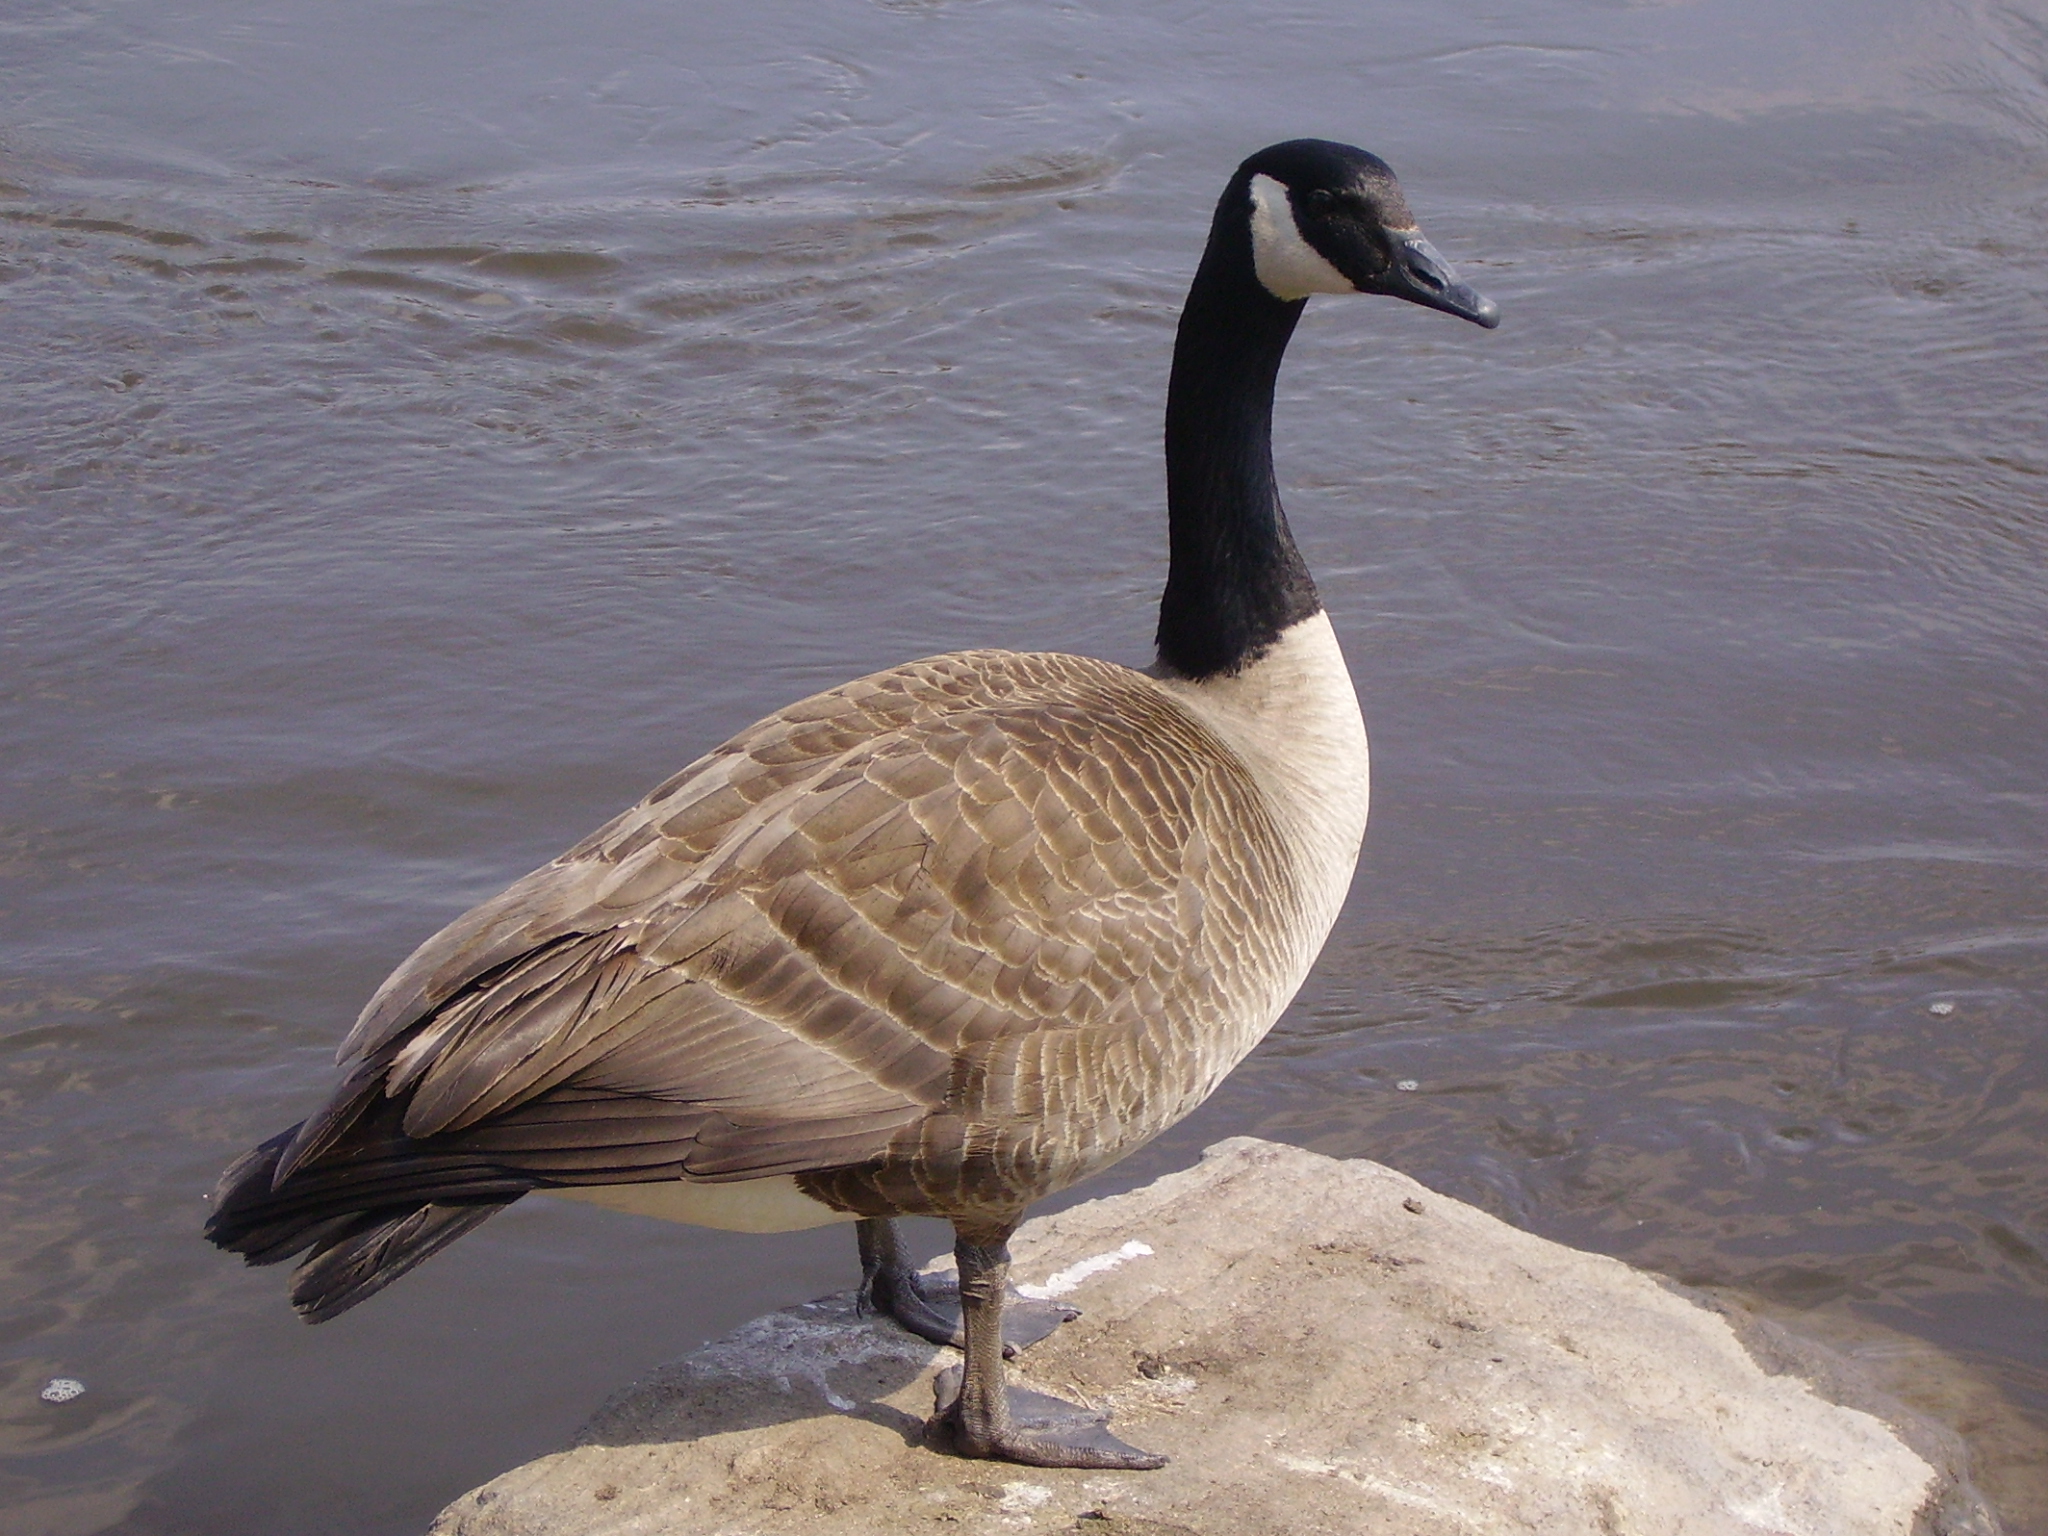 Goose Canada Wallpaper Background Image